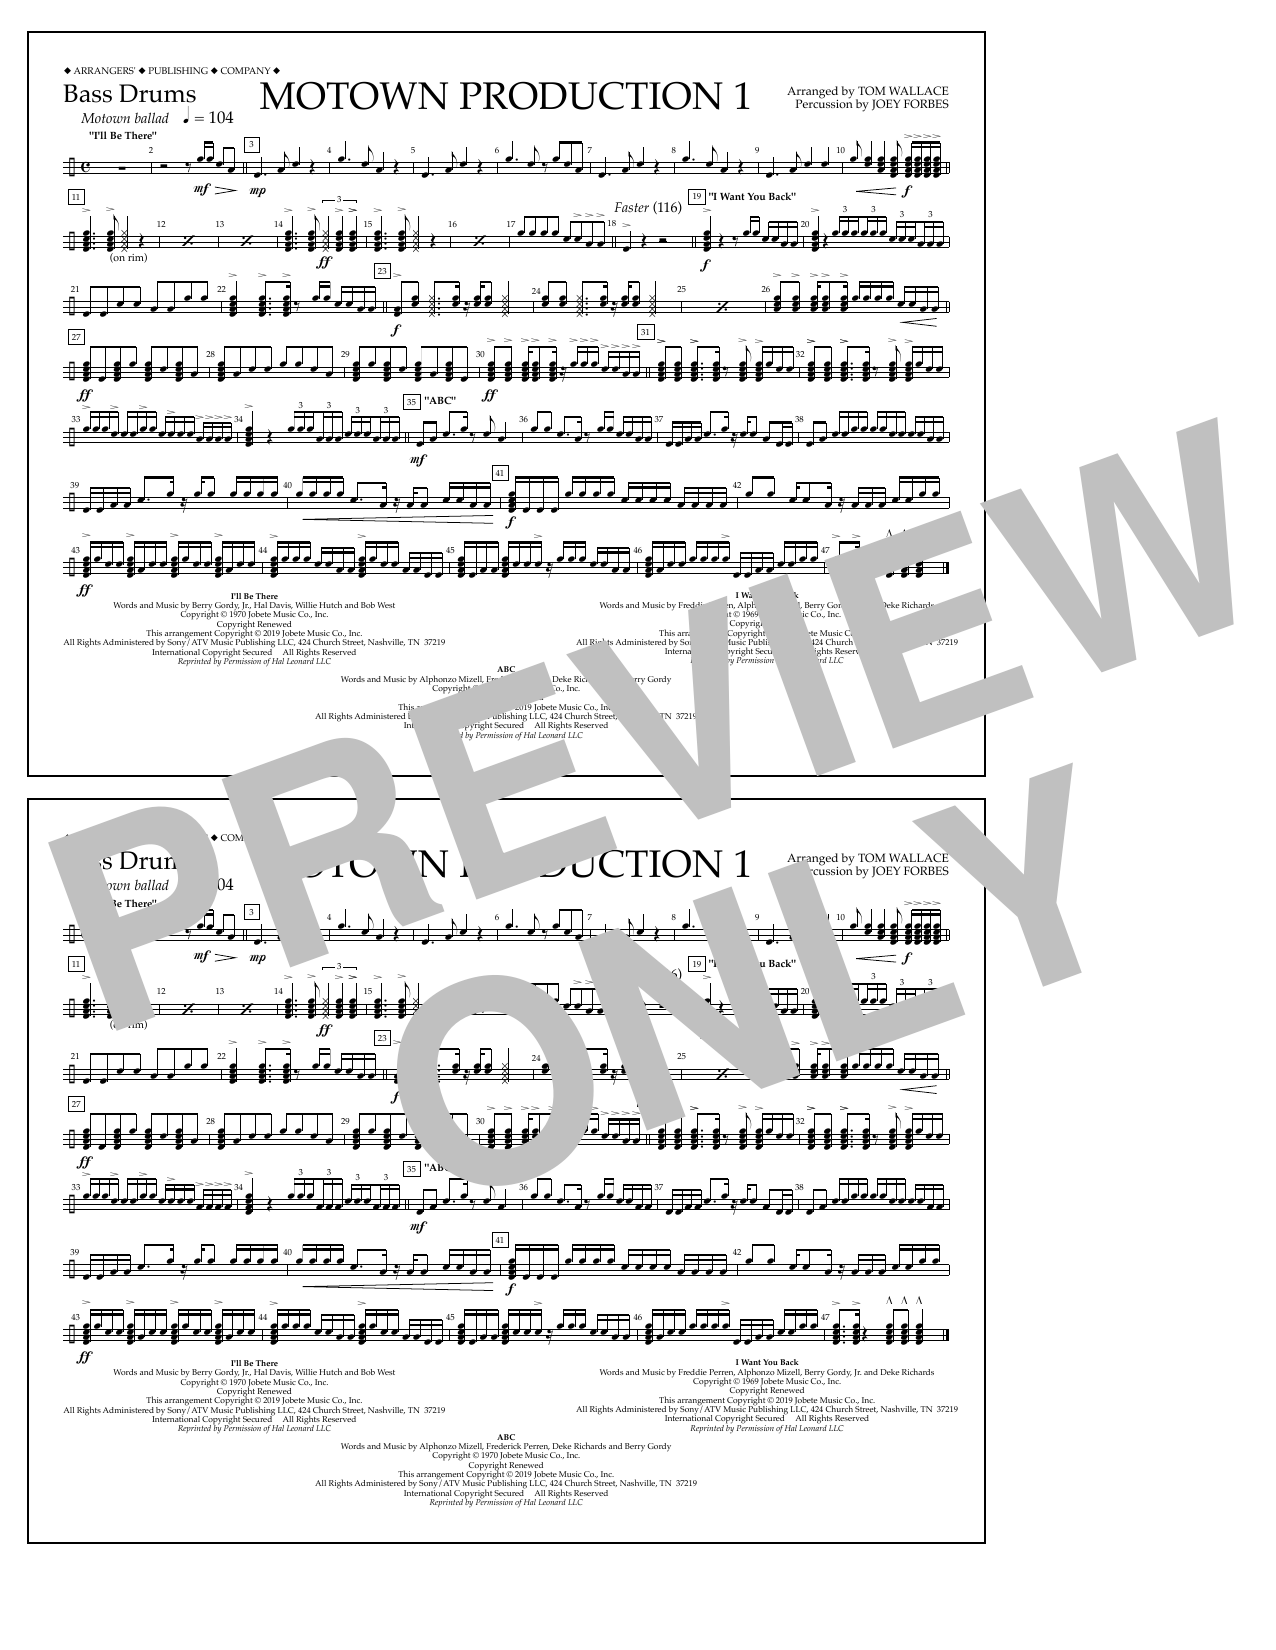 Download Jackson 5 Motown Production 1(arr. Tom Wallace) - Sheet Music